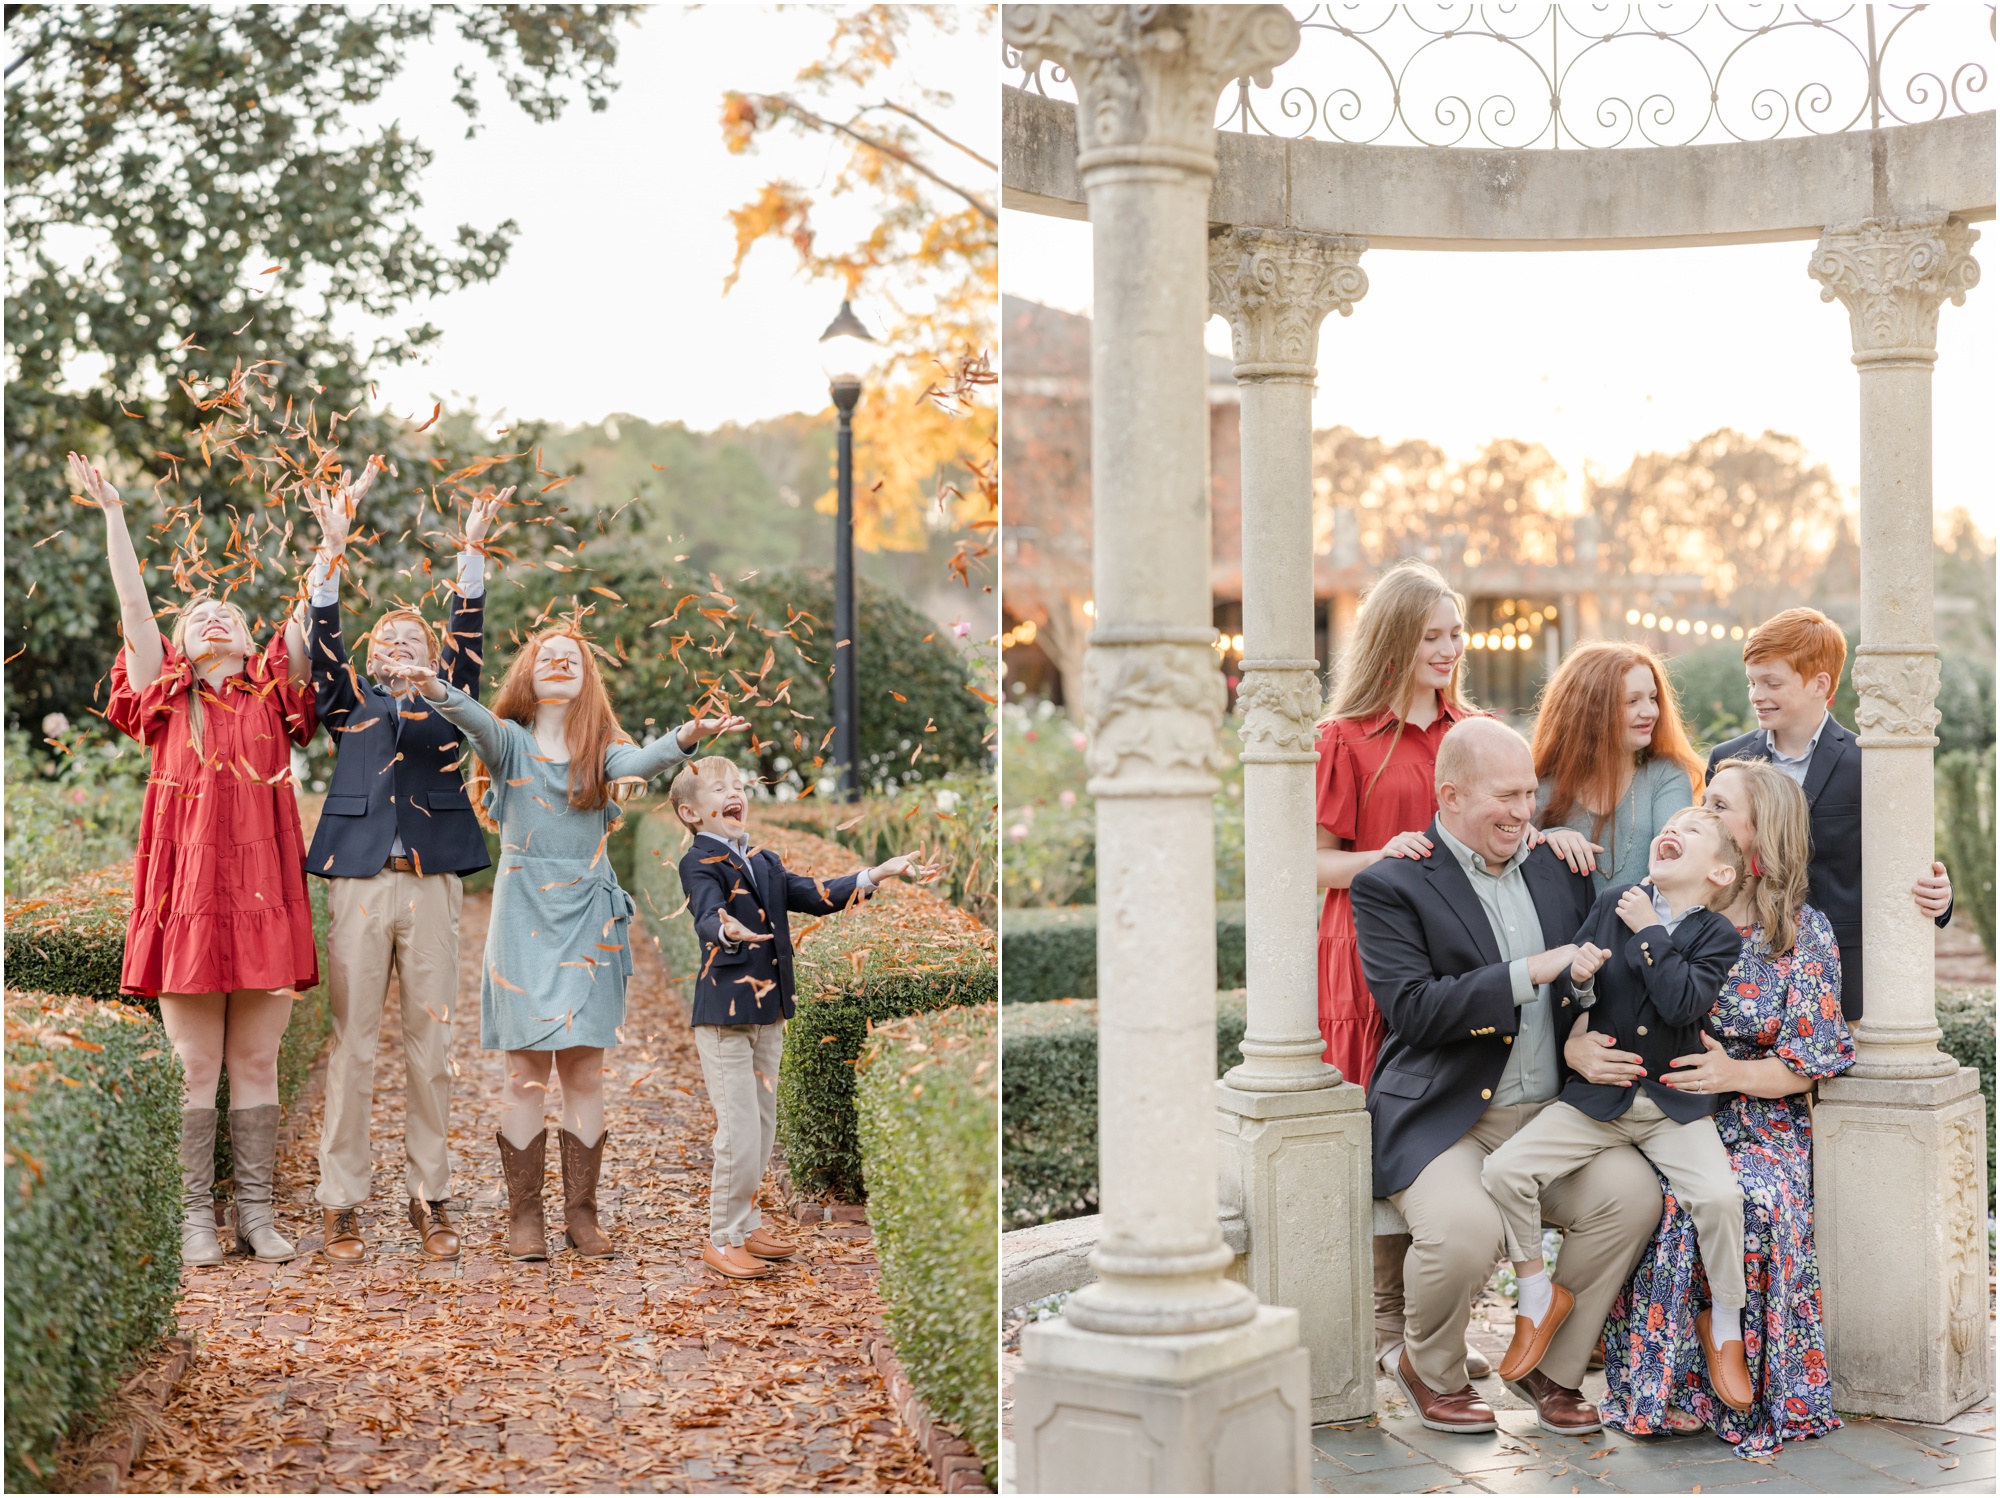 Greenville family portraits taken during the Fall on Furman's Campus.